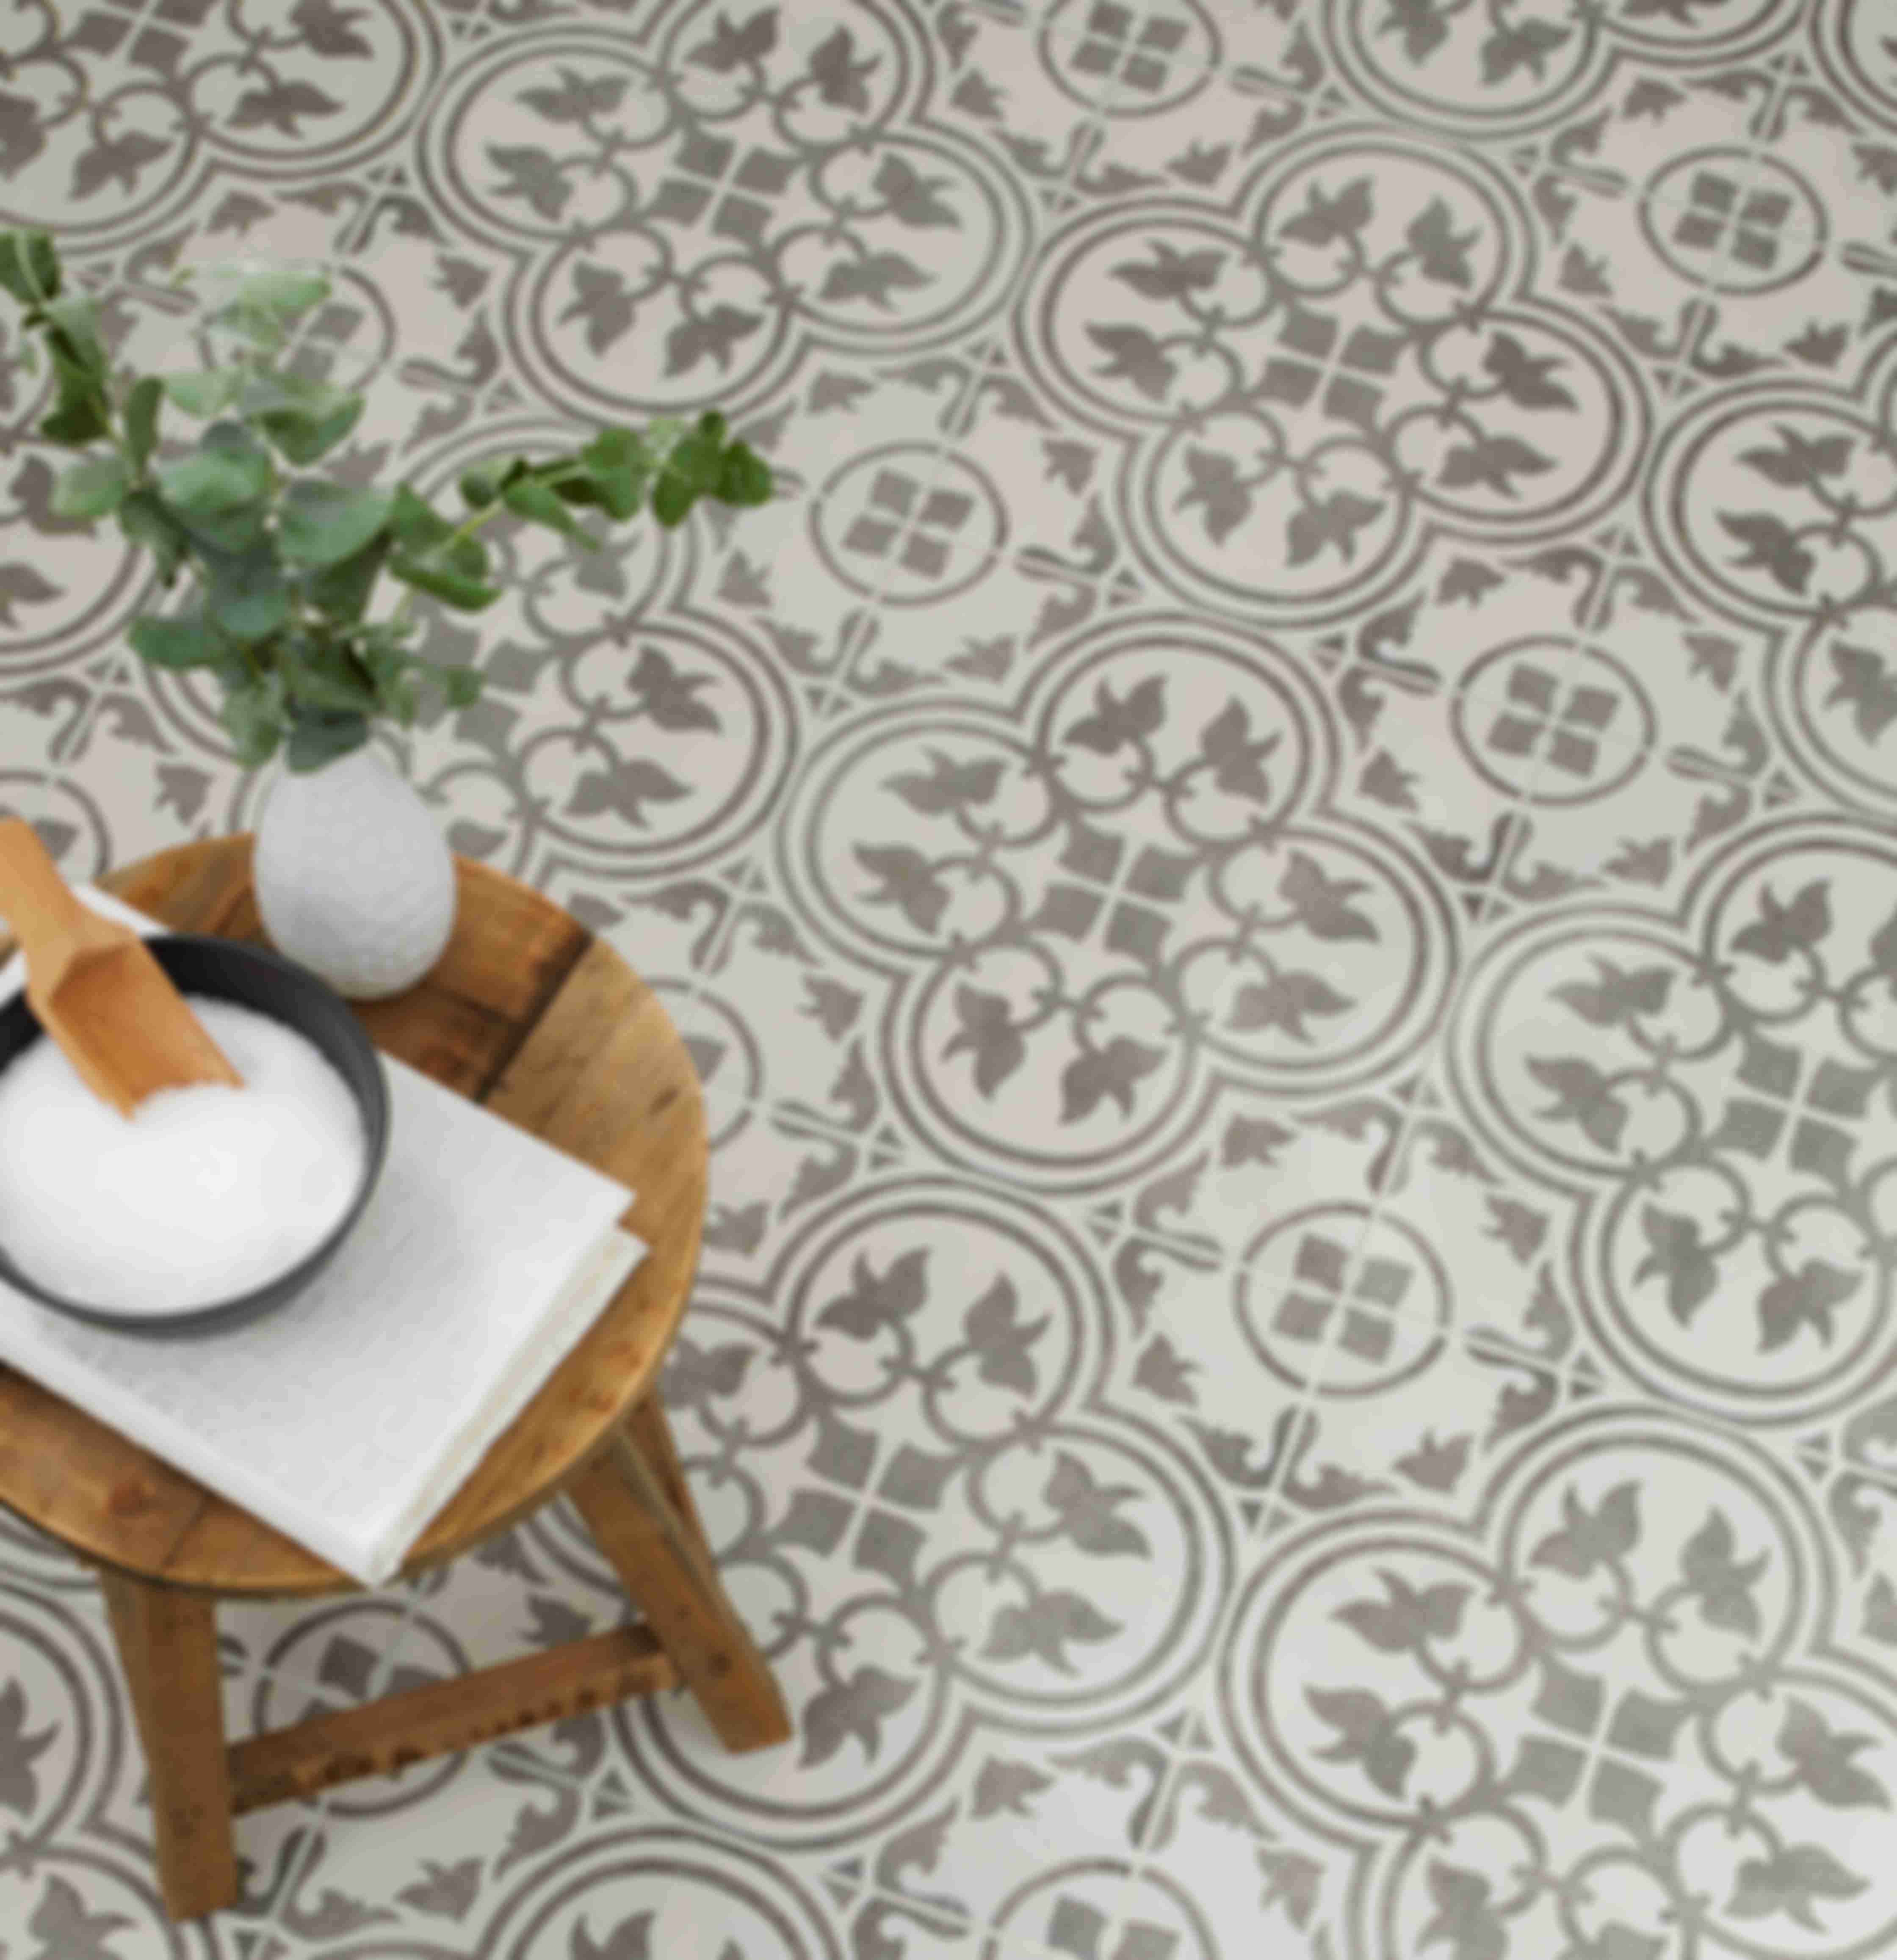 Tiled floor with a grey and white floral-inspired tile pattern and wood accent stool.